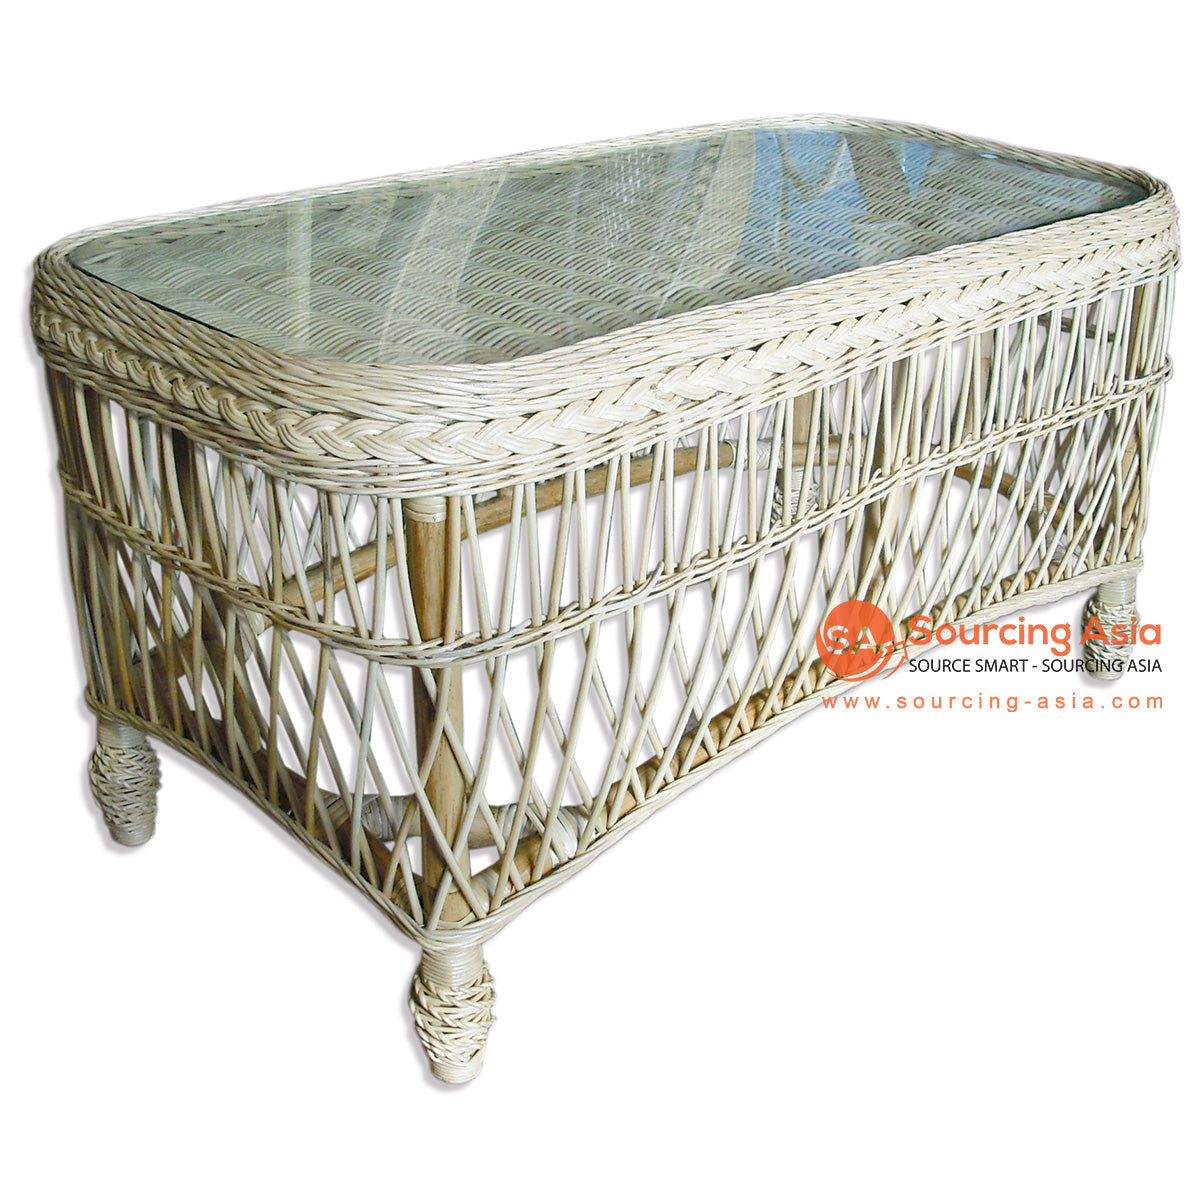 MUR003-CT NATURAL RATTAN CANE COFFEE TABLE WITH GLASS TOP